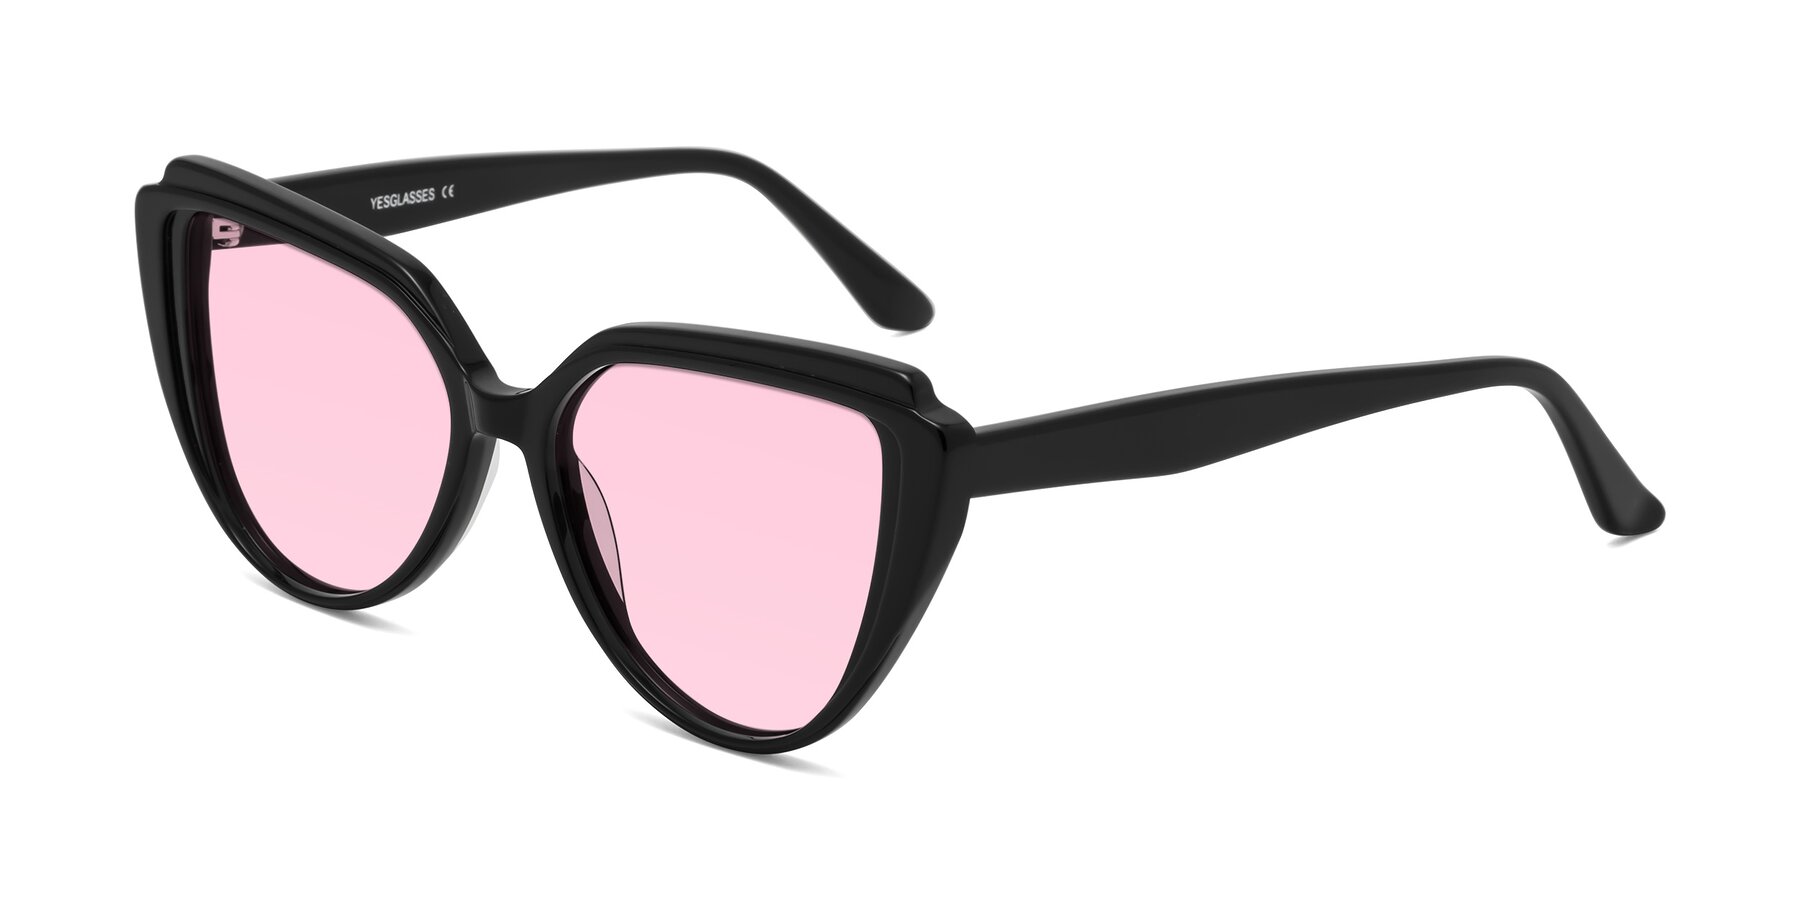 Angle of Zubar in Black with Light Pink Tinted Lenses